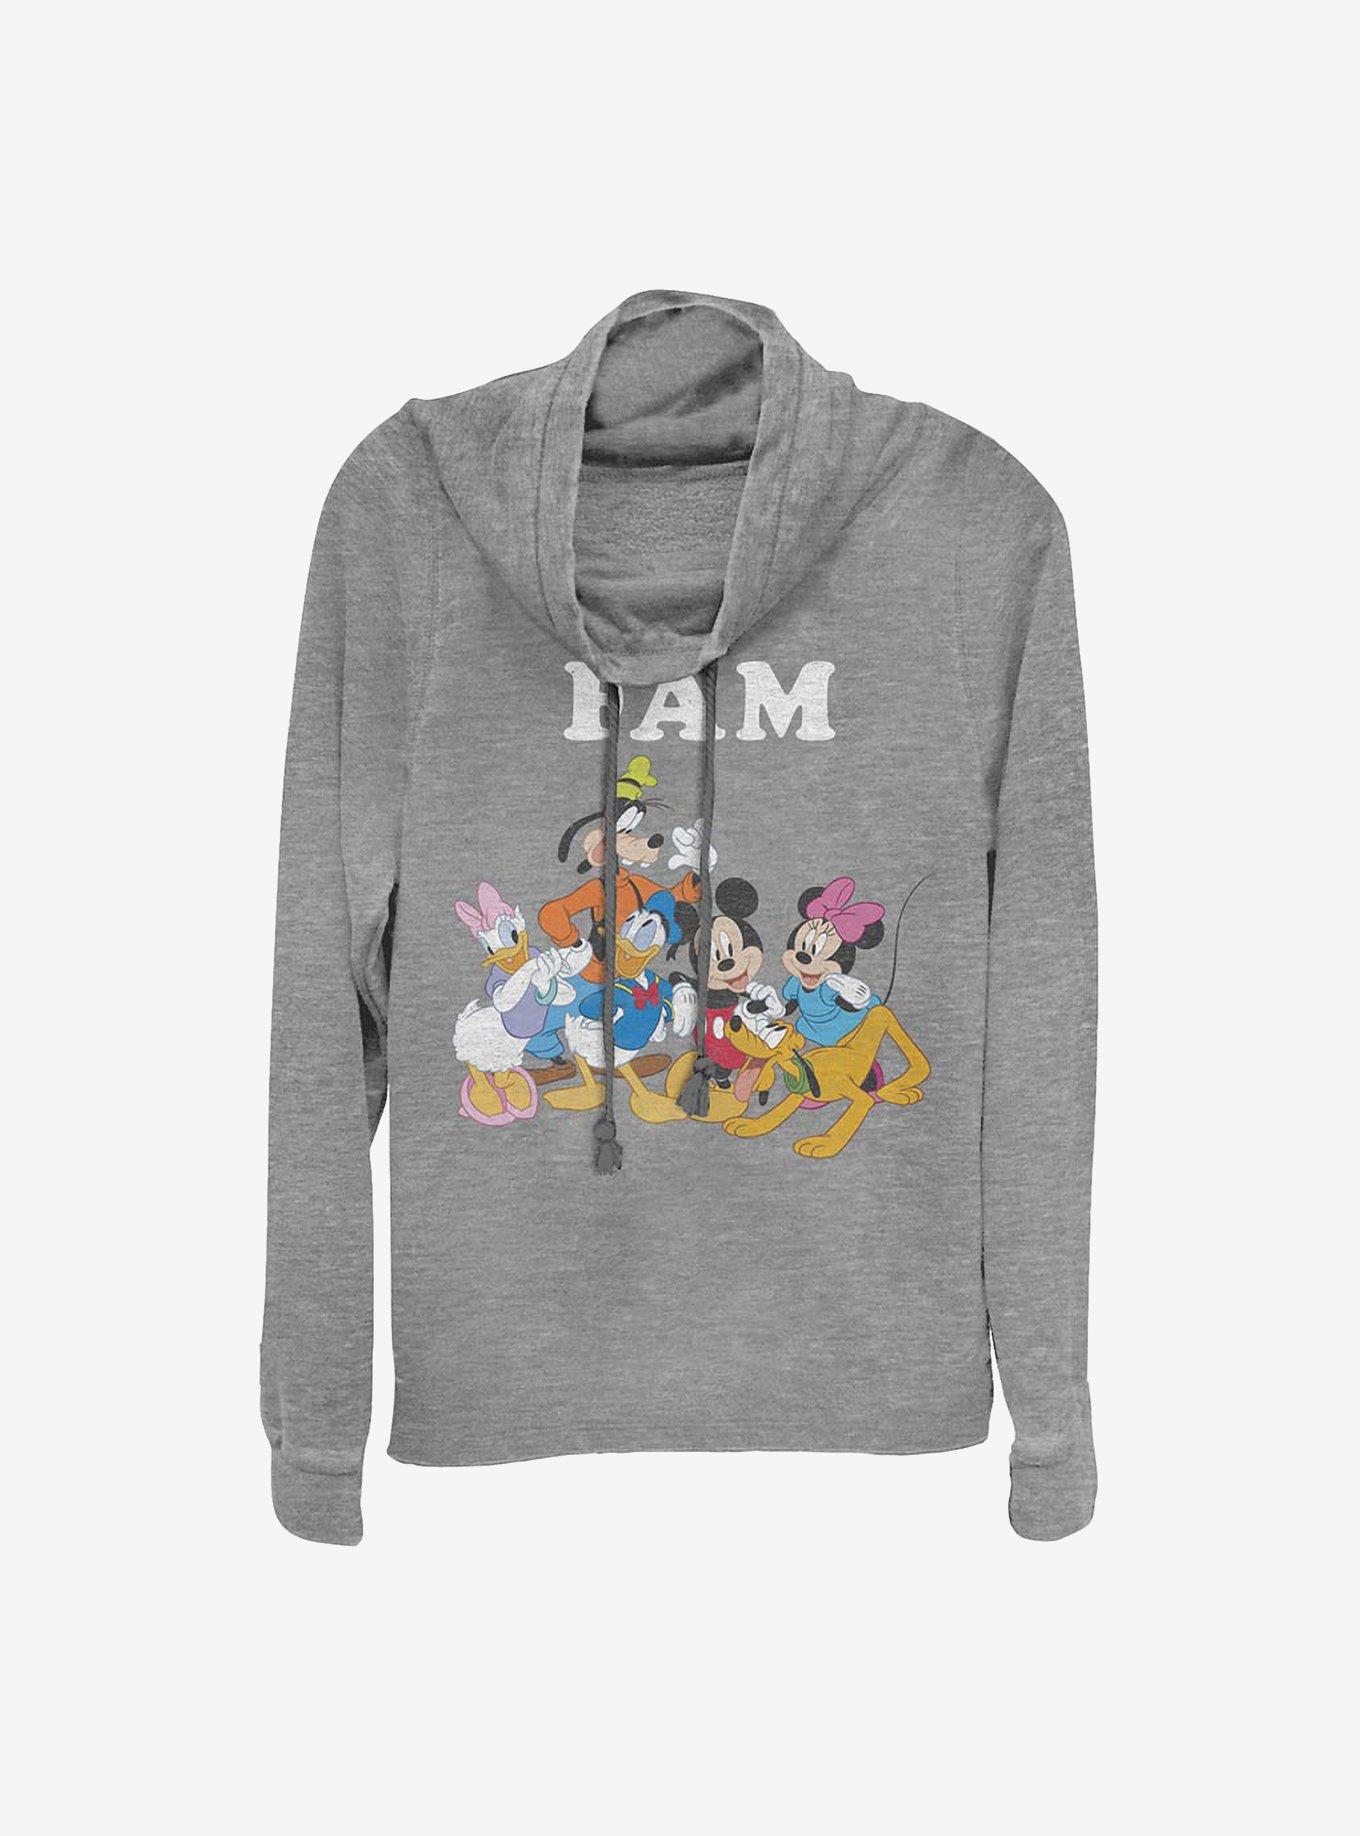 Disney Mickey Mouse And Friends Fam Cowlneck Long-Sleeve Girls Top, GRAY HTR, hi-res